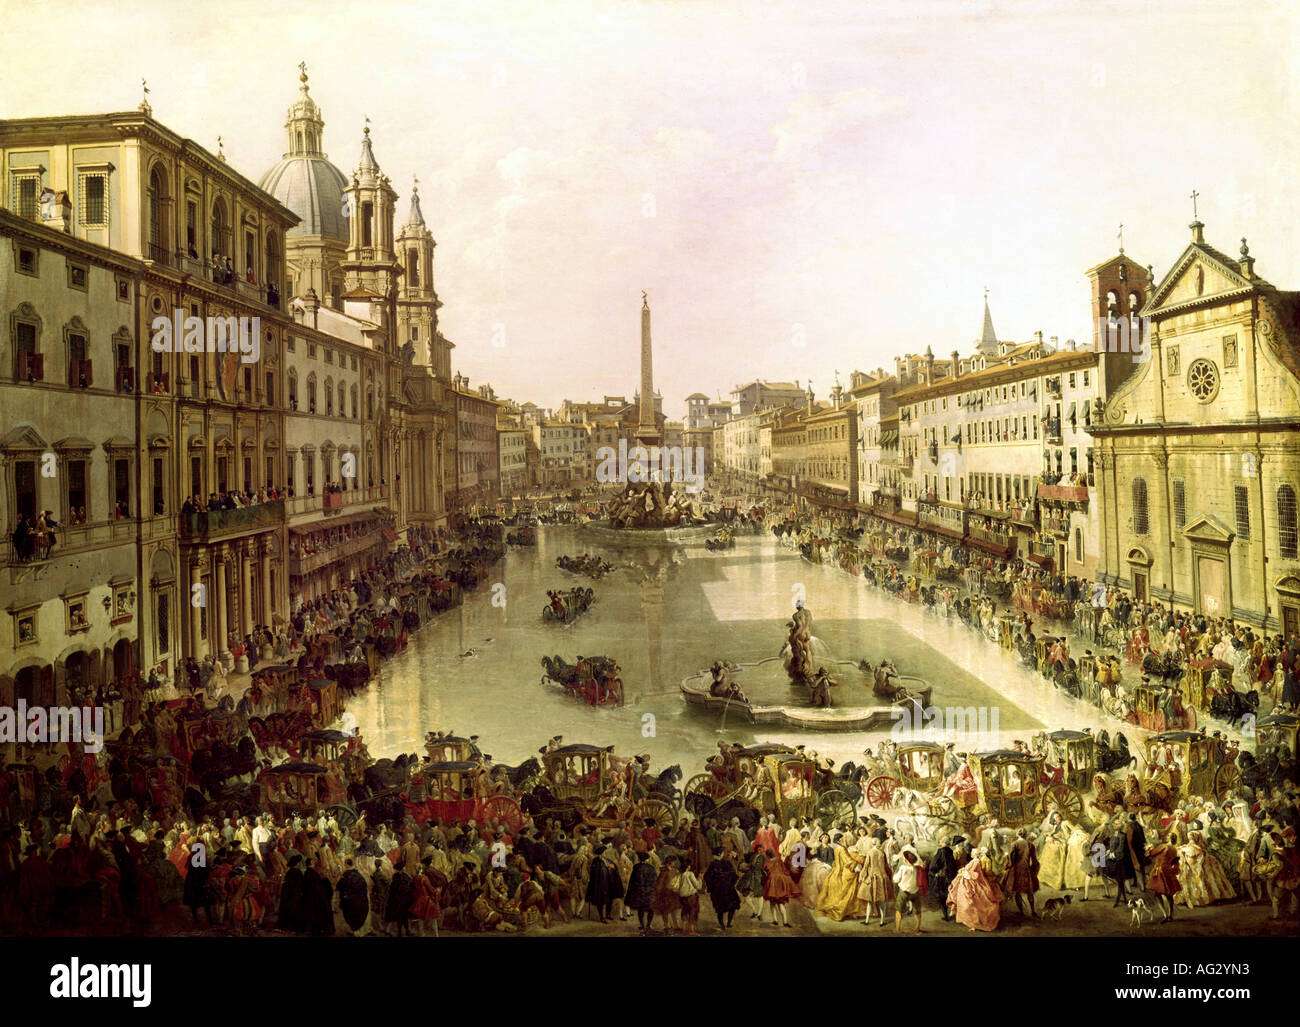 fine arts, Pannini, Giovanni Paolo, (17.6.1691 - 21.10.1765),  painting, 'Piazza Navona in Rom unter Wasser gesetzt' (Piazza Navona in Rome set under water), 1756, 95,5 cm x 136 cm, State Gallery, Hanover, Germany, Europe, fine arts, Baroque, 18th century, Italy, city view, views, cityscape, cityscapes, , Artist's Copyright has not to be cleared Stock Photo